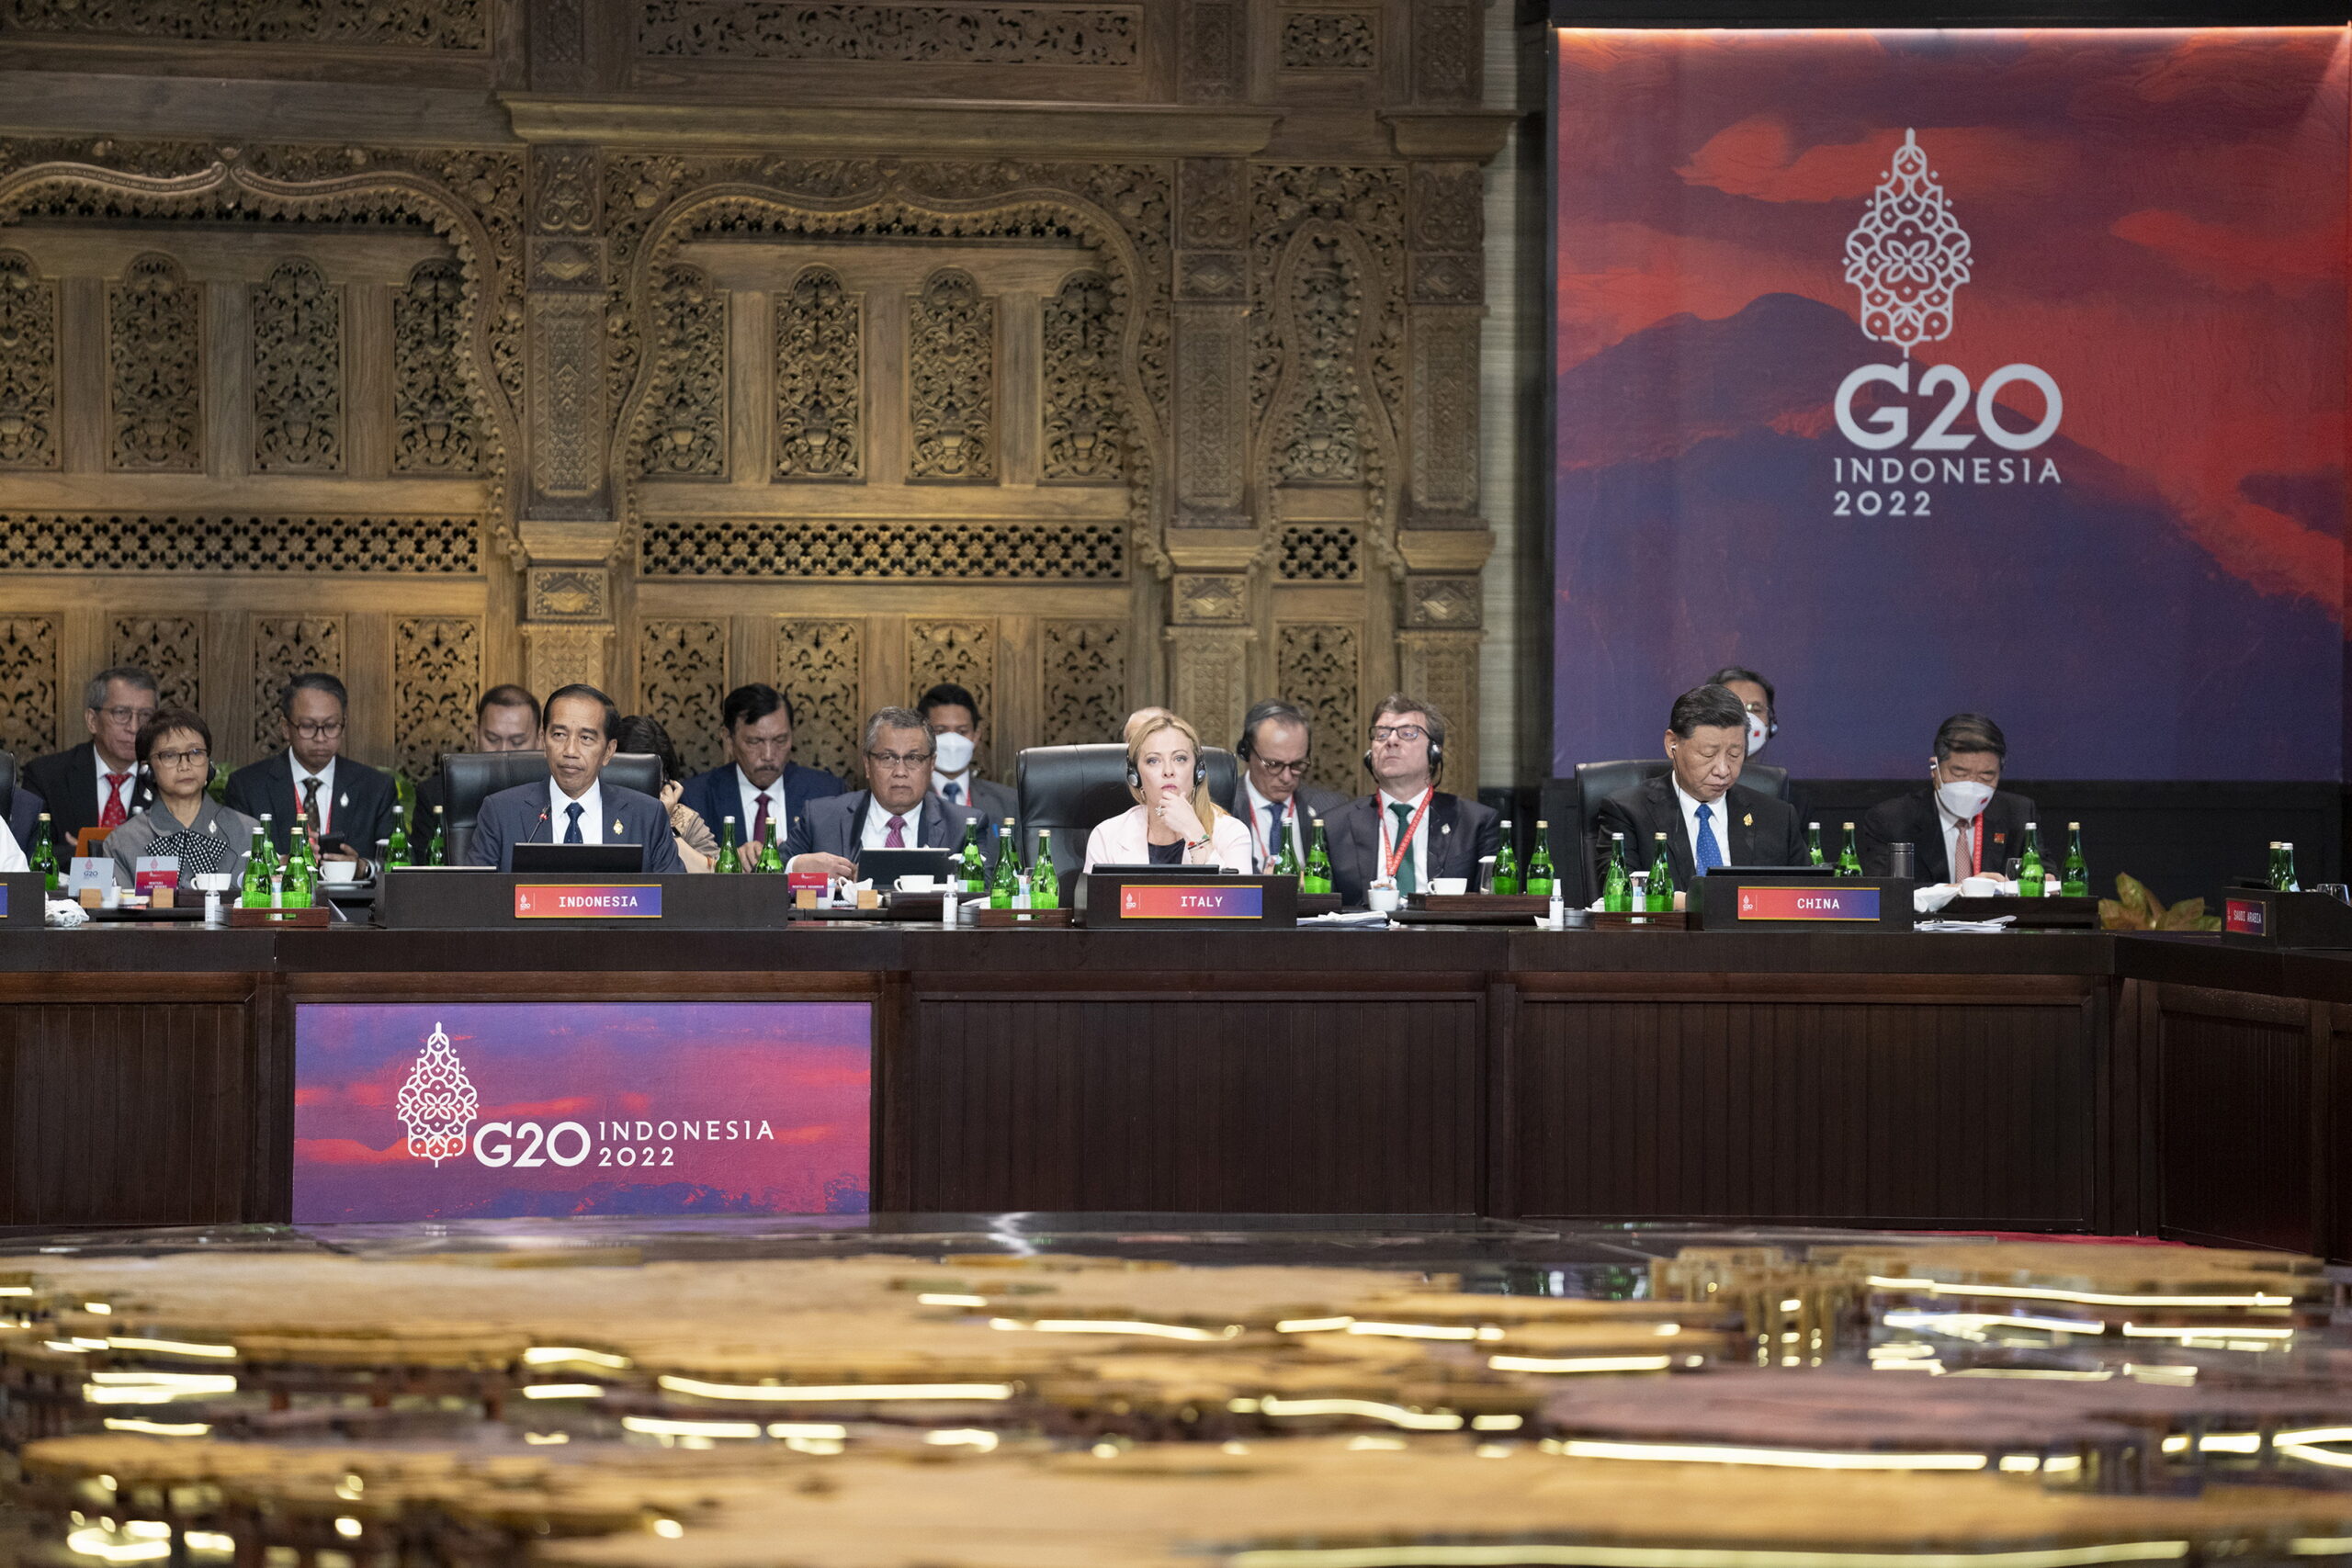 g20 indonesia issues